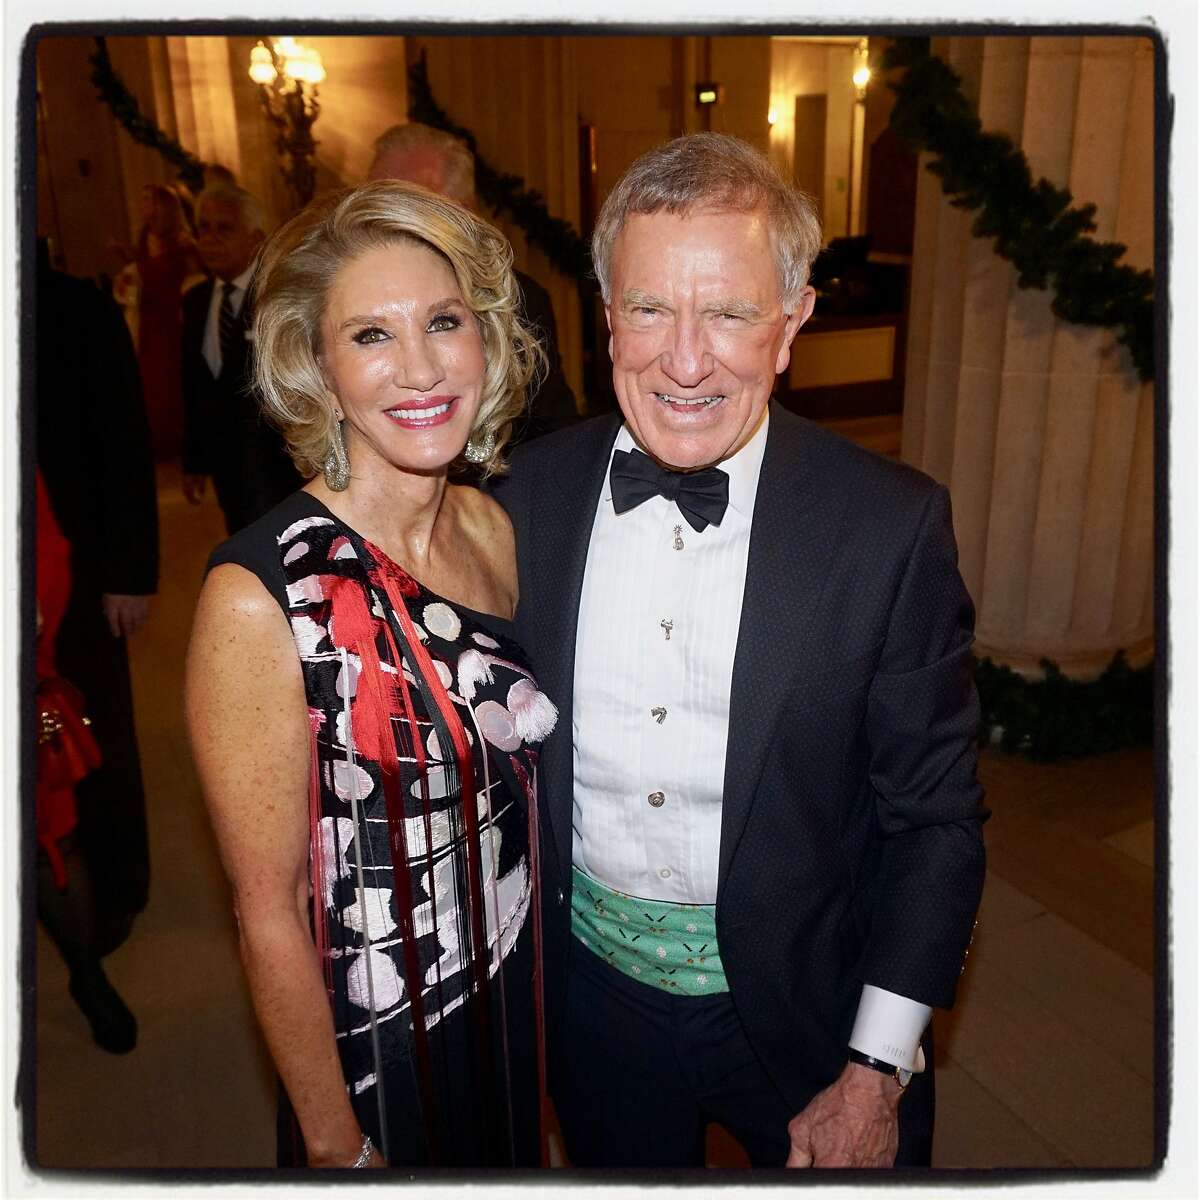 New SF Opera Guild President Mary Poland and her husband, Bill Poland, at An Evening on the Stage. Nov. 28, 2018.